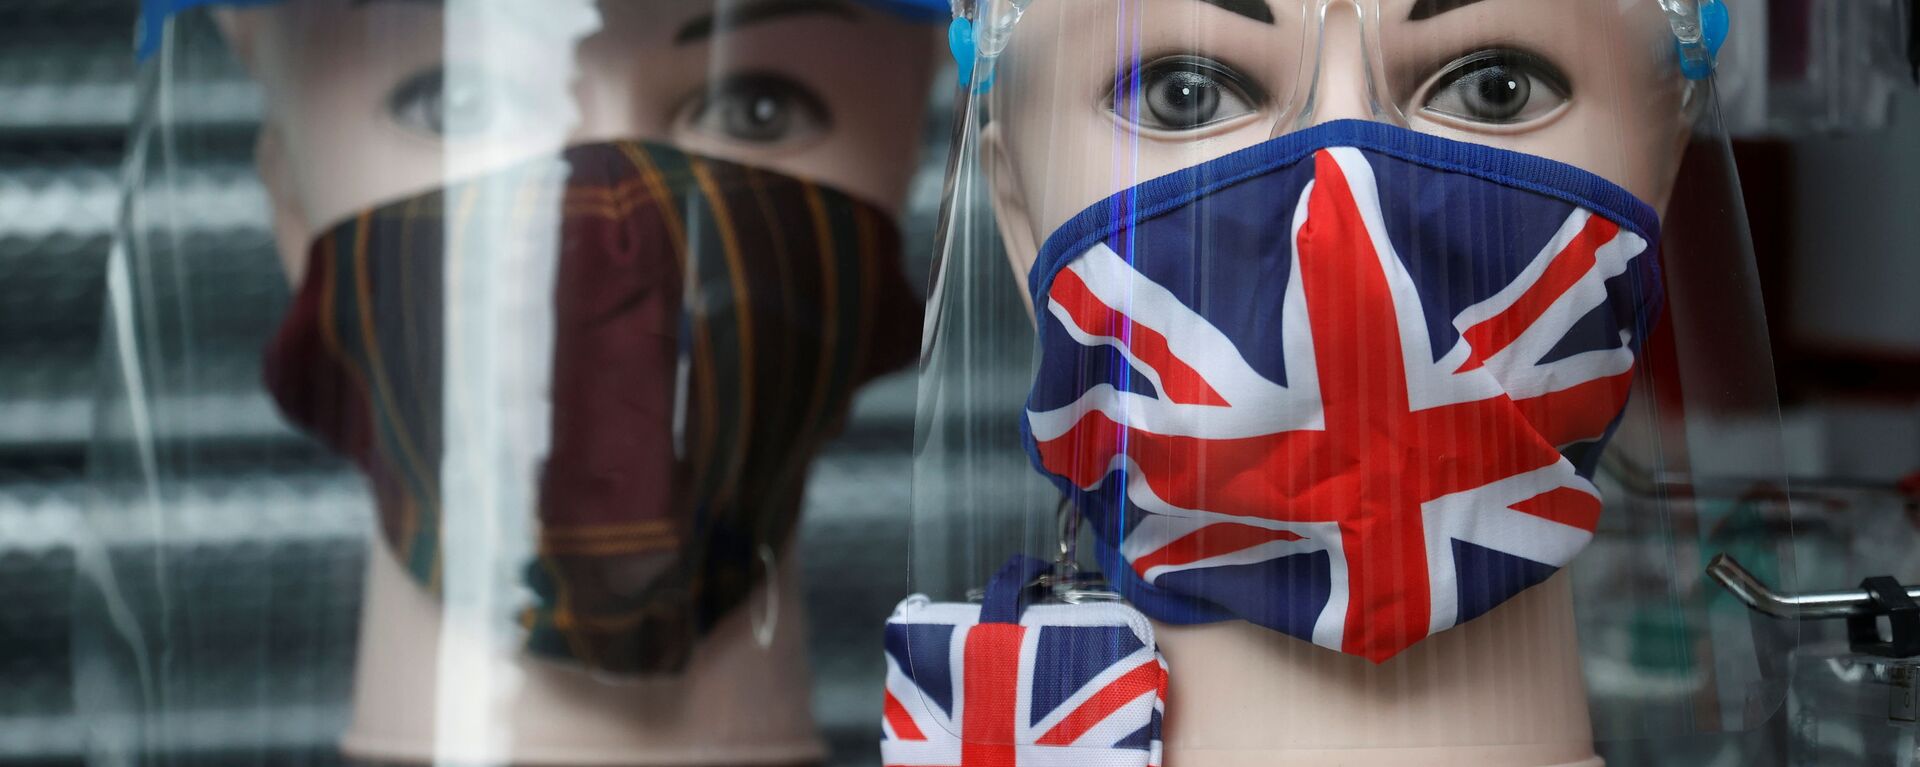 A Union Jack design face mask is seen for sale in the window of a shop amid the outbreak of the coronavirus disease (COVID-19) in Manchester, Britain, December 26, 2020 - 俄羅斯衛星通訊社, 1920, 28.06.2021